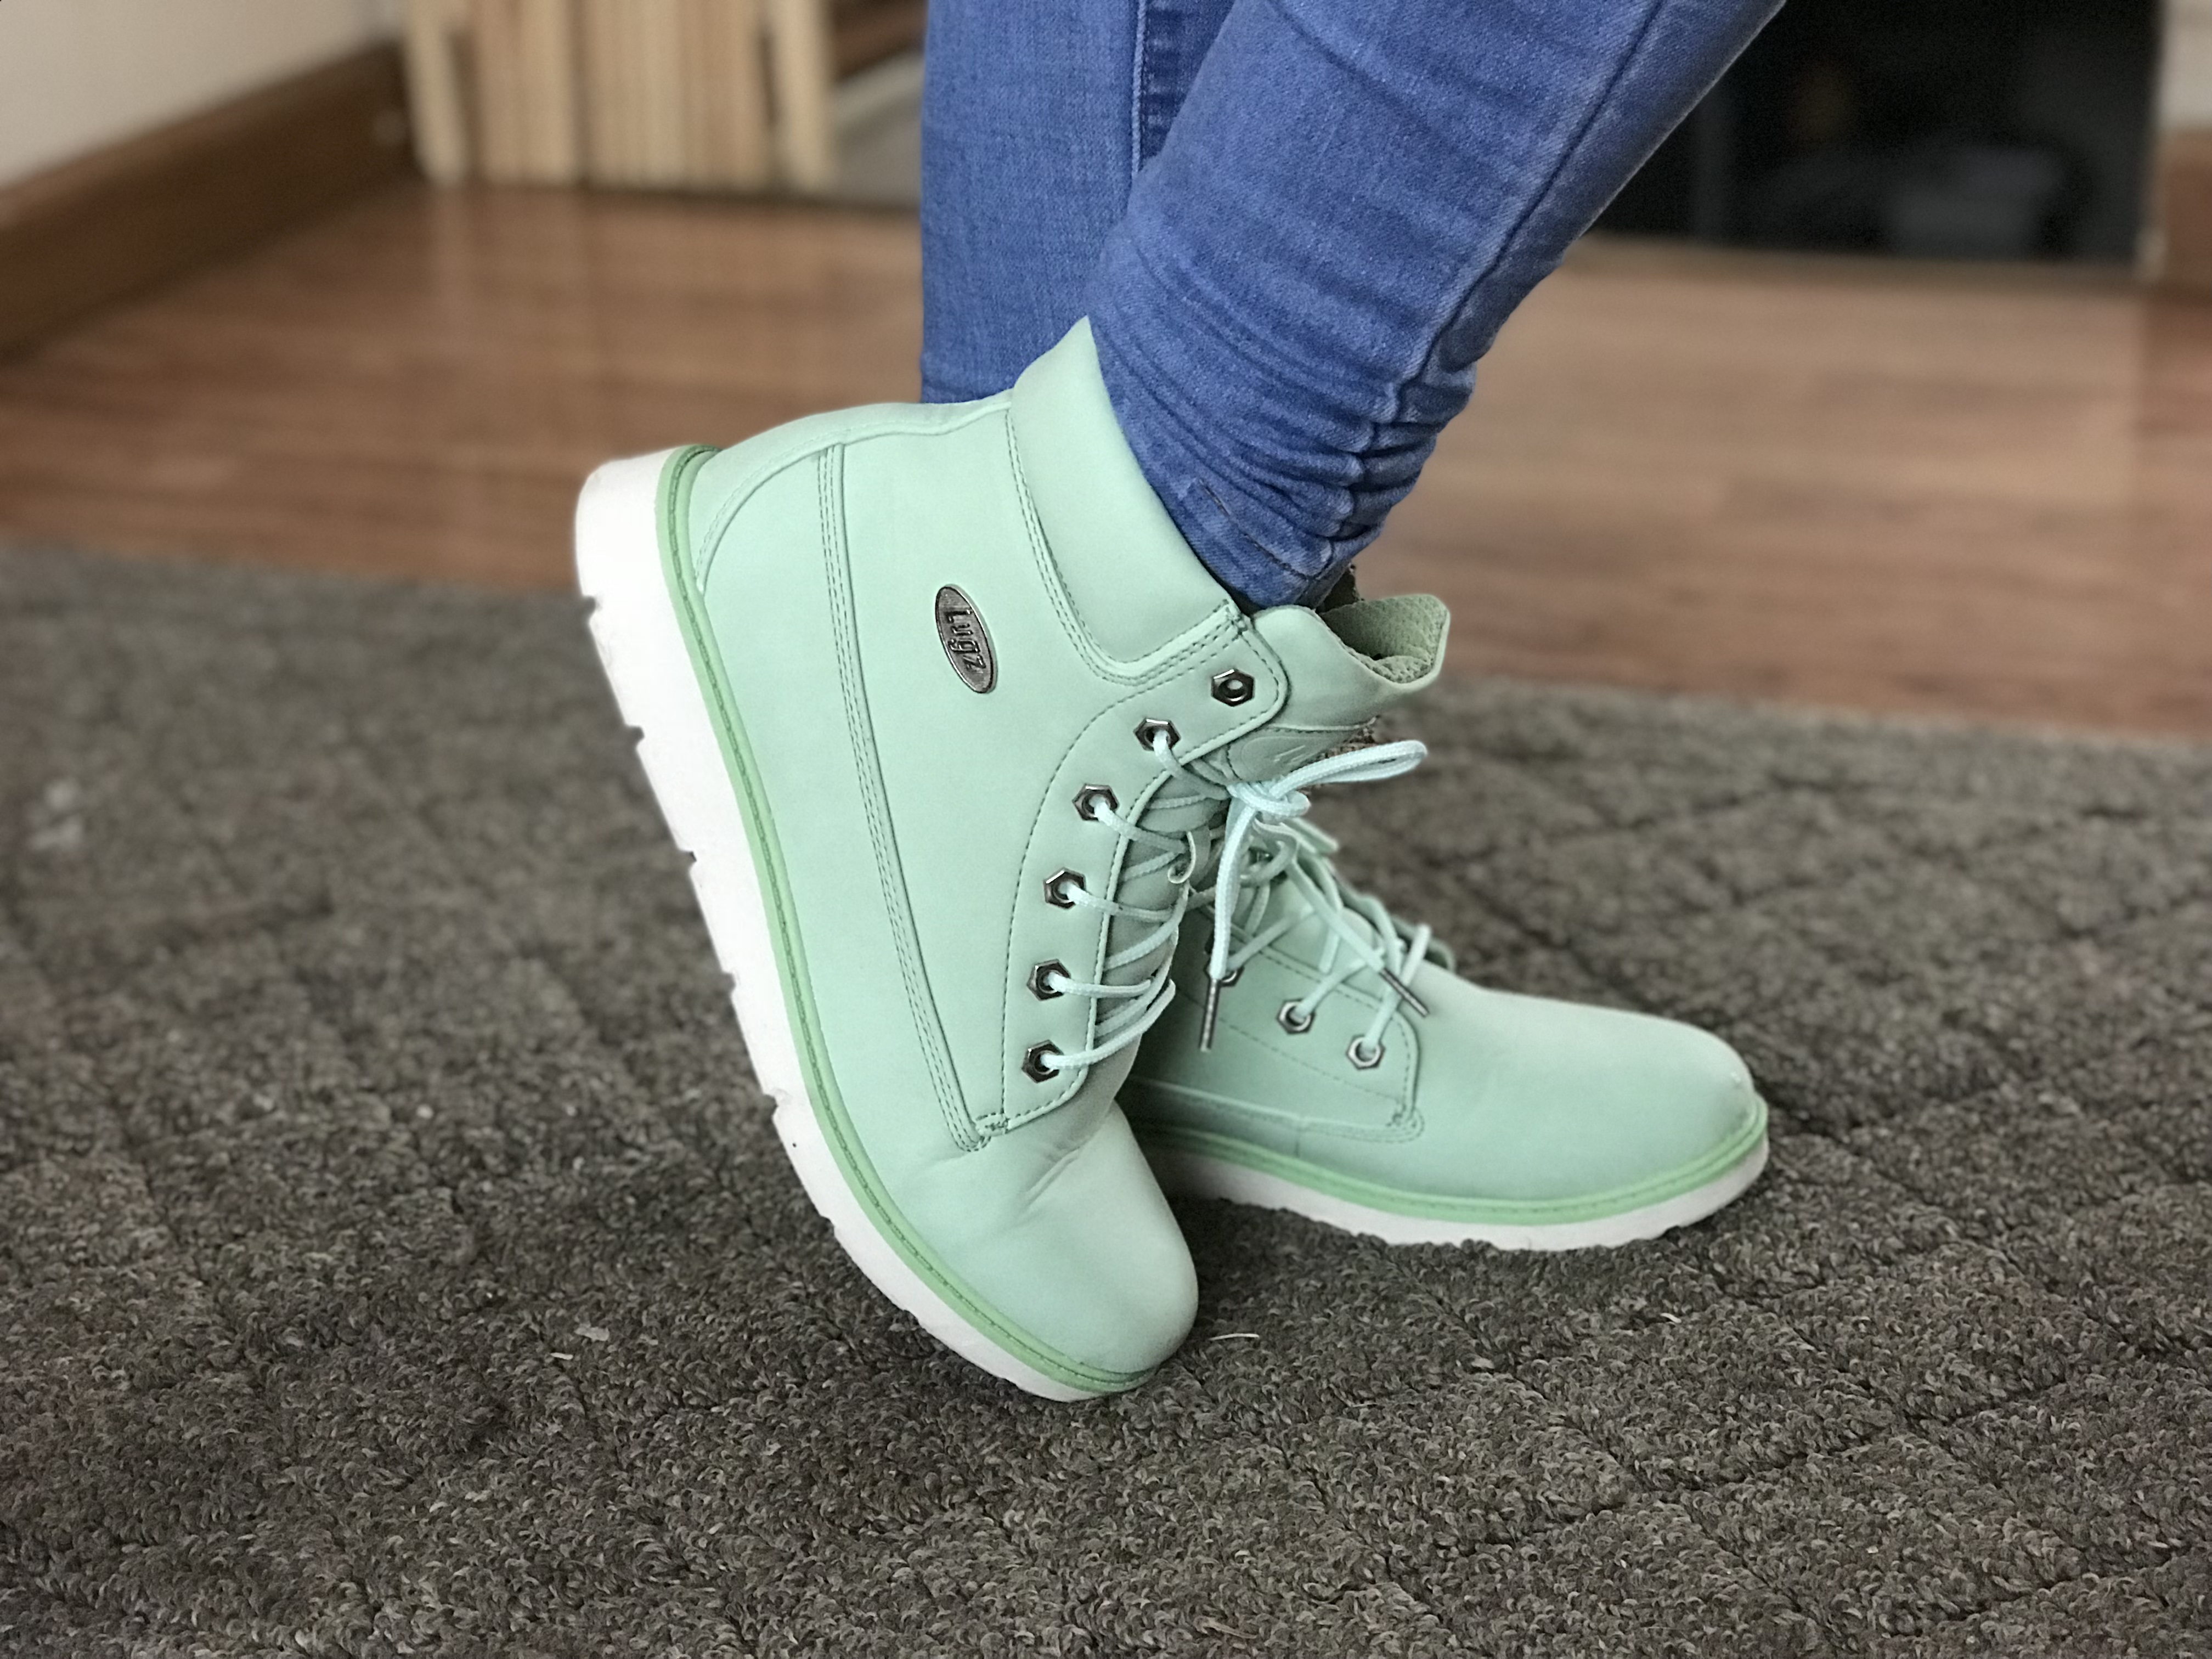 I just LOVE the color of this Quill HI boot from Lugz. Abbie has been looking for a pair of boots like this for awhile now so I set her loose on the Lugz website and told her to pick out the pair she liked. She chose the Women's Quill HI in the mint color.